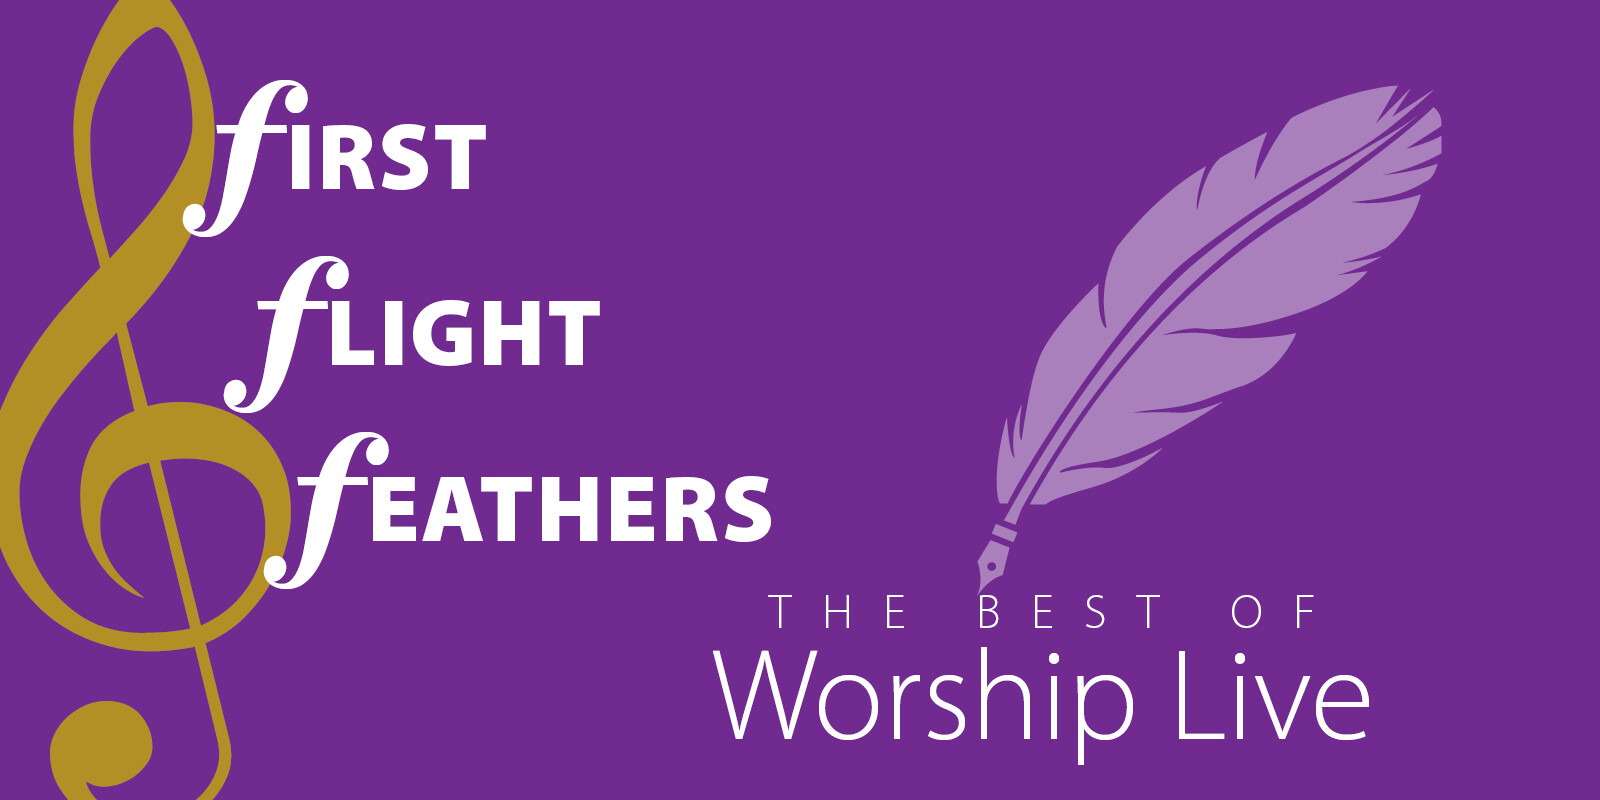 First Flight Feathers The Best of Worship Live Sacristy Press